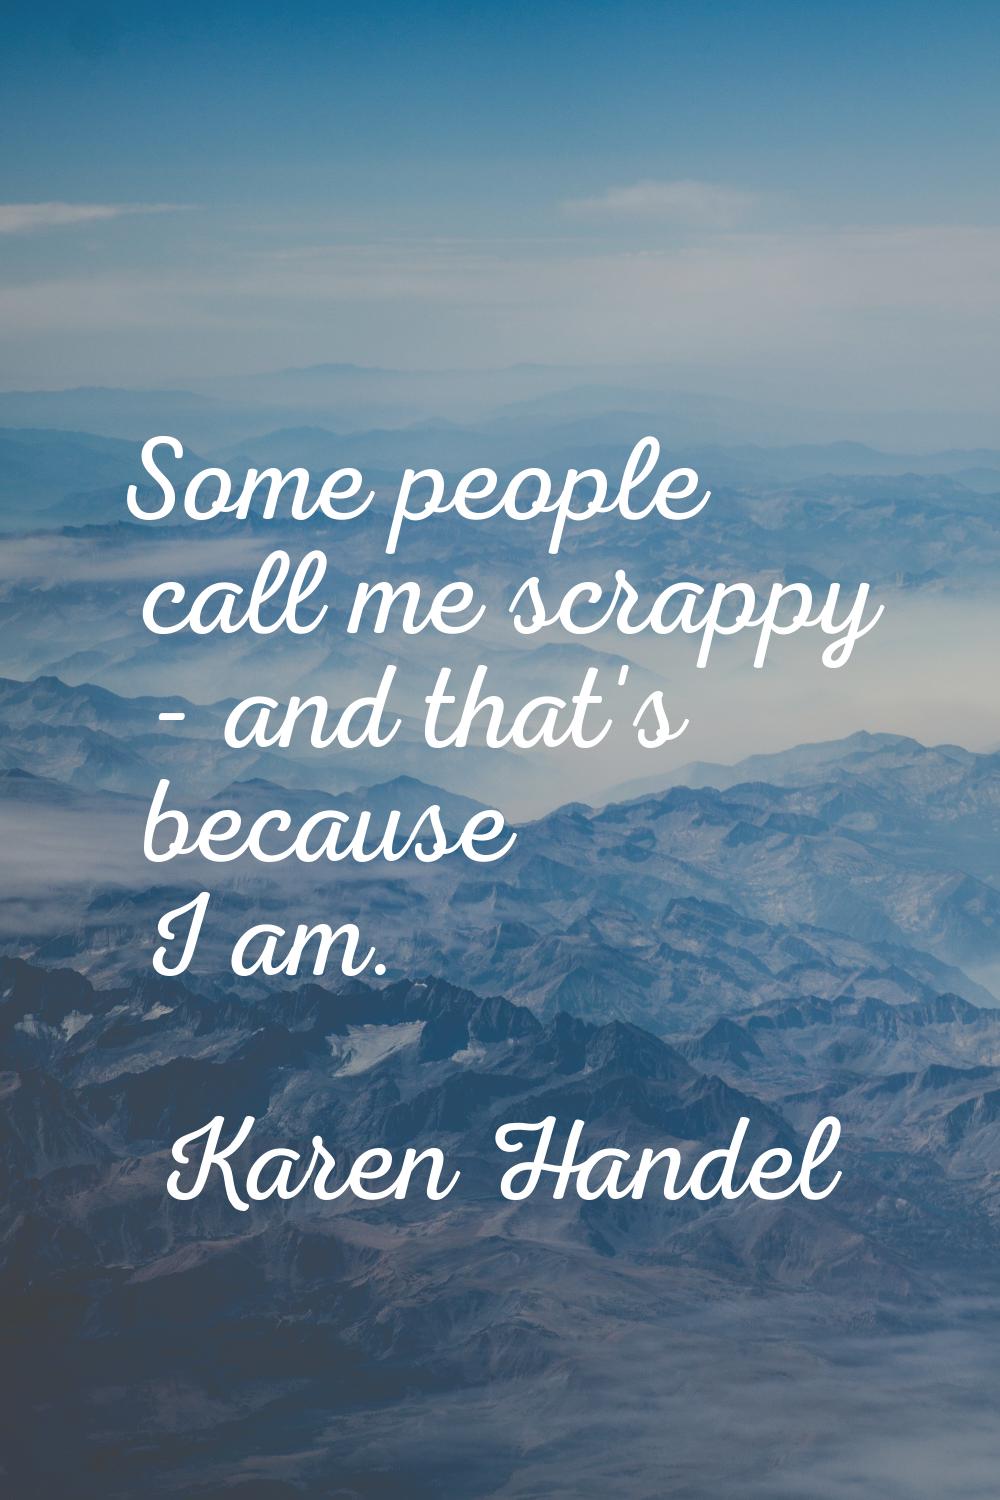 Some people call me scrappy - and that's because I am.